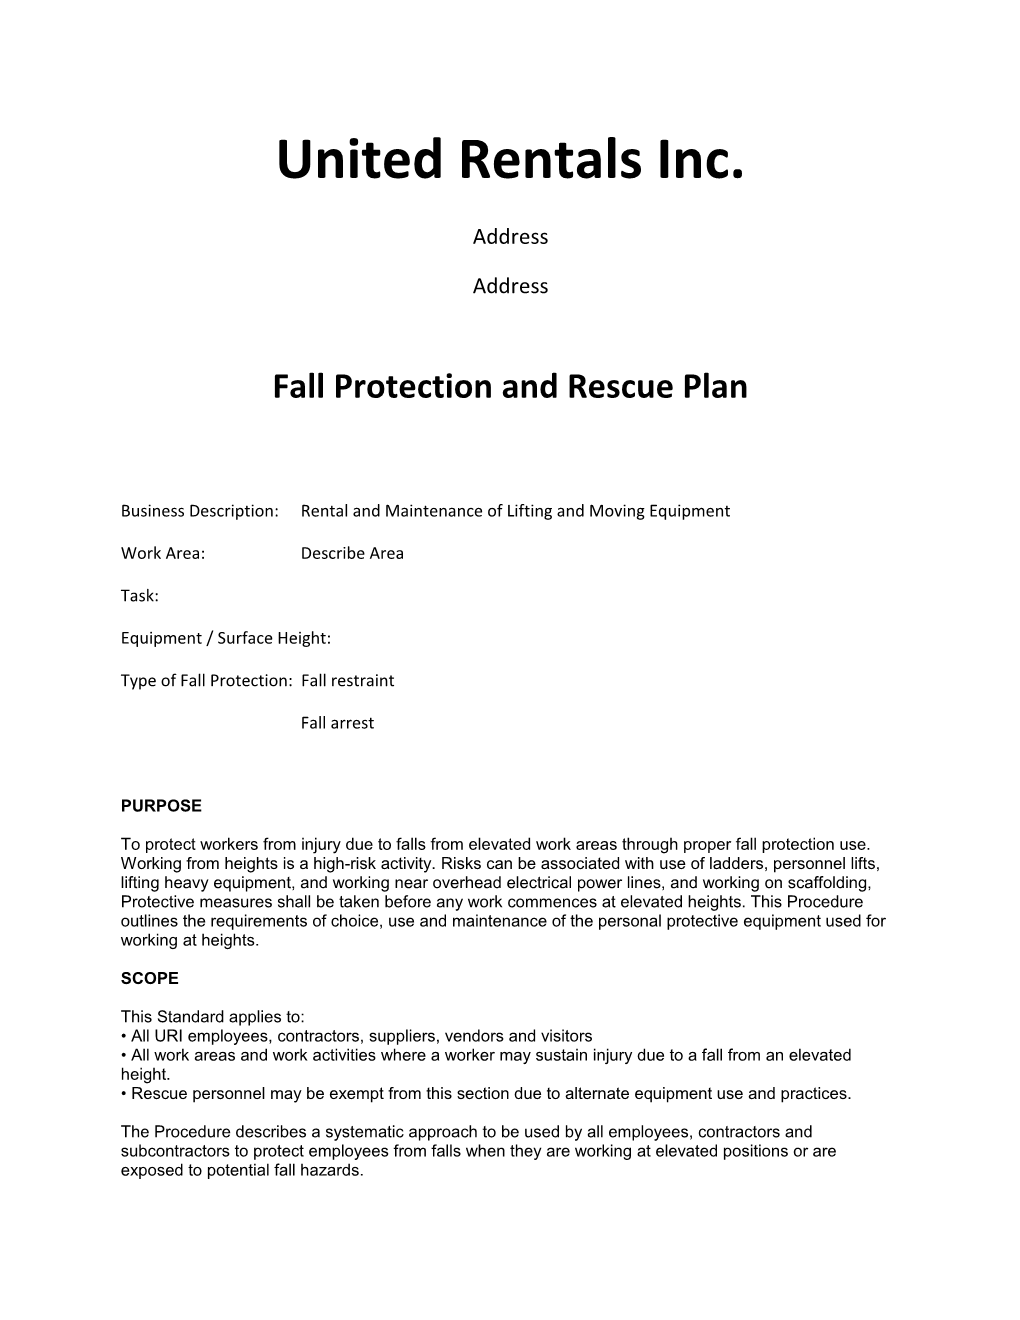 Fall Protection and Rescue Plan